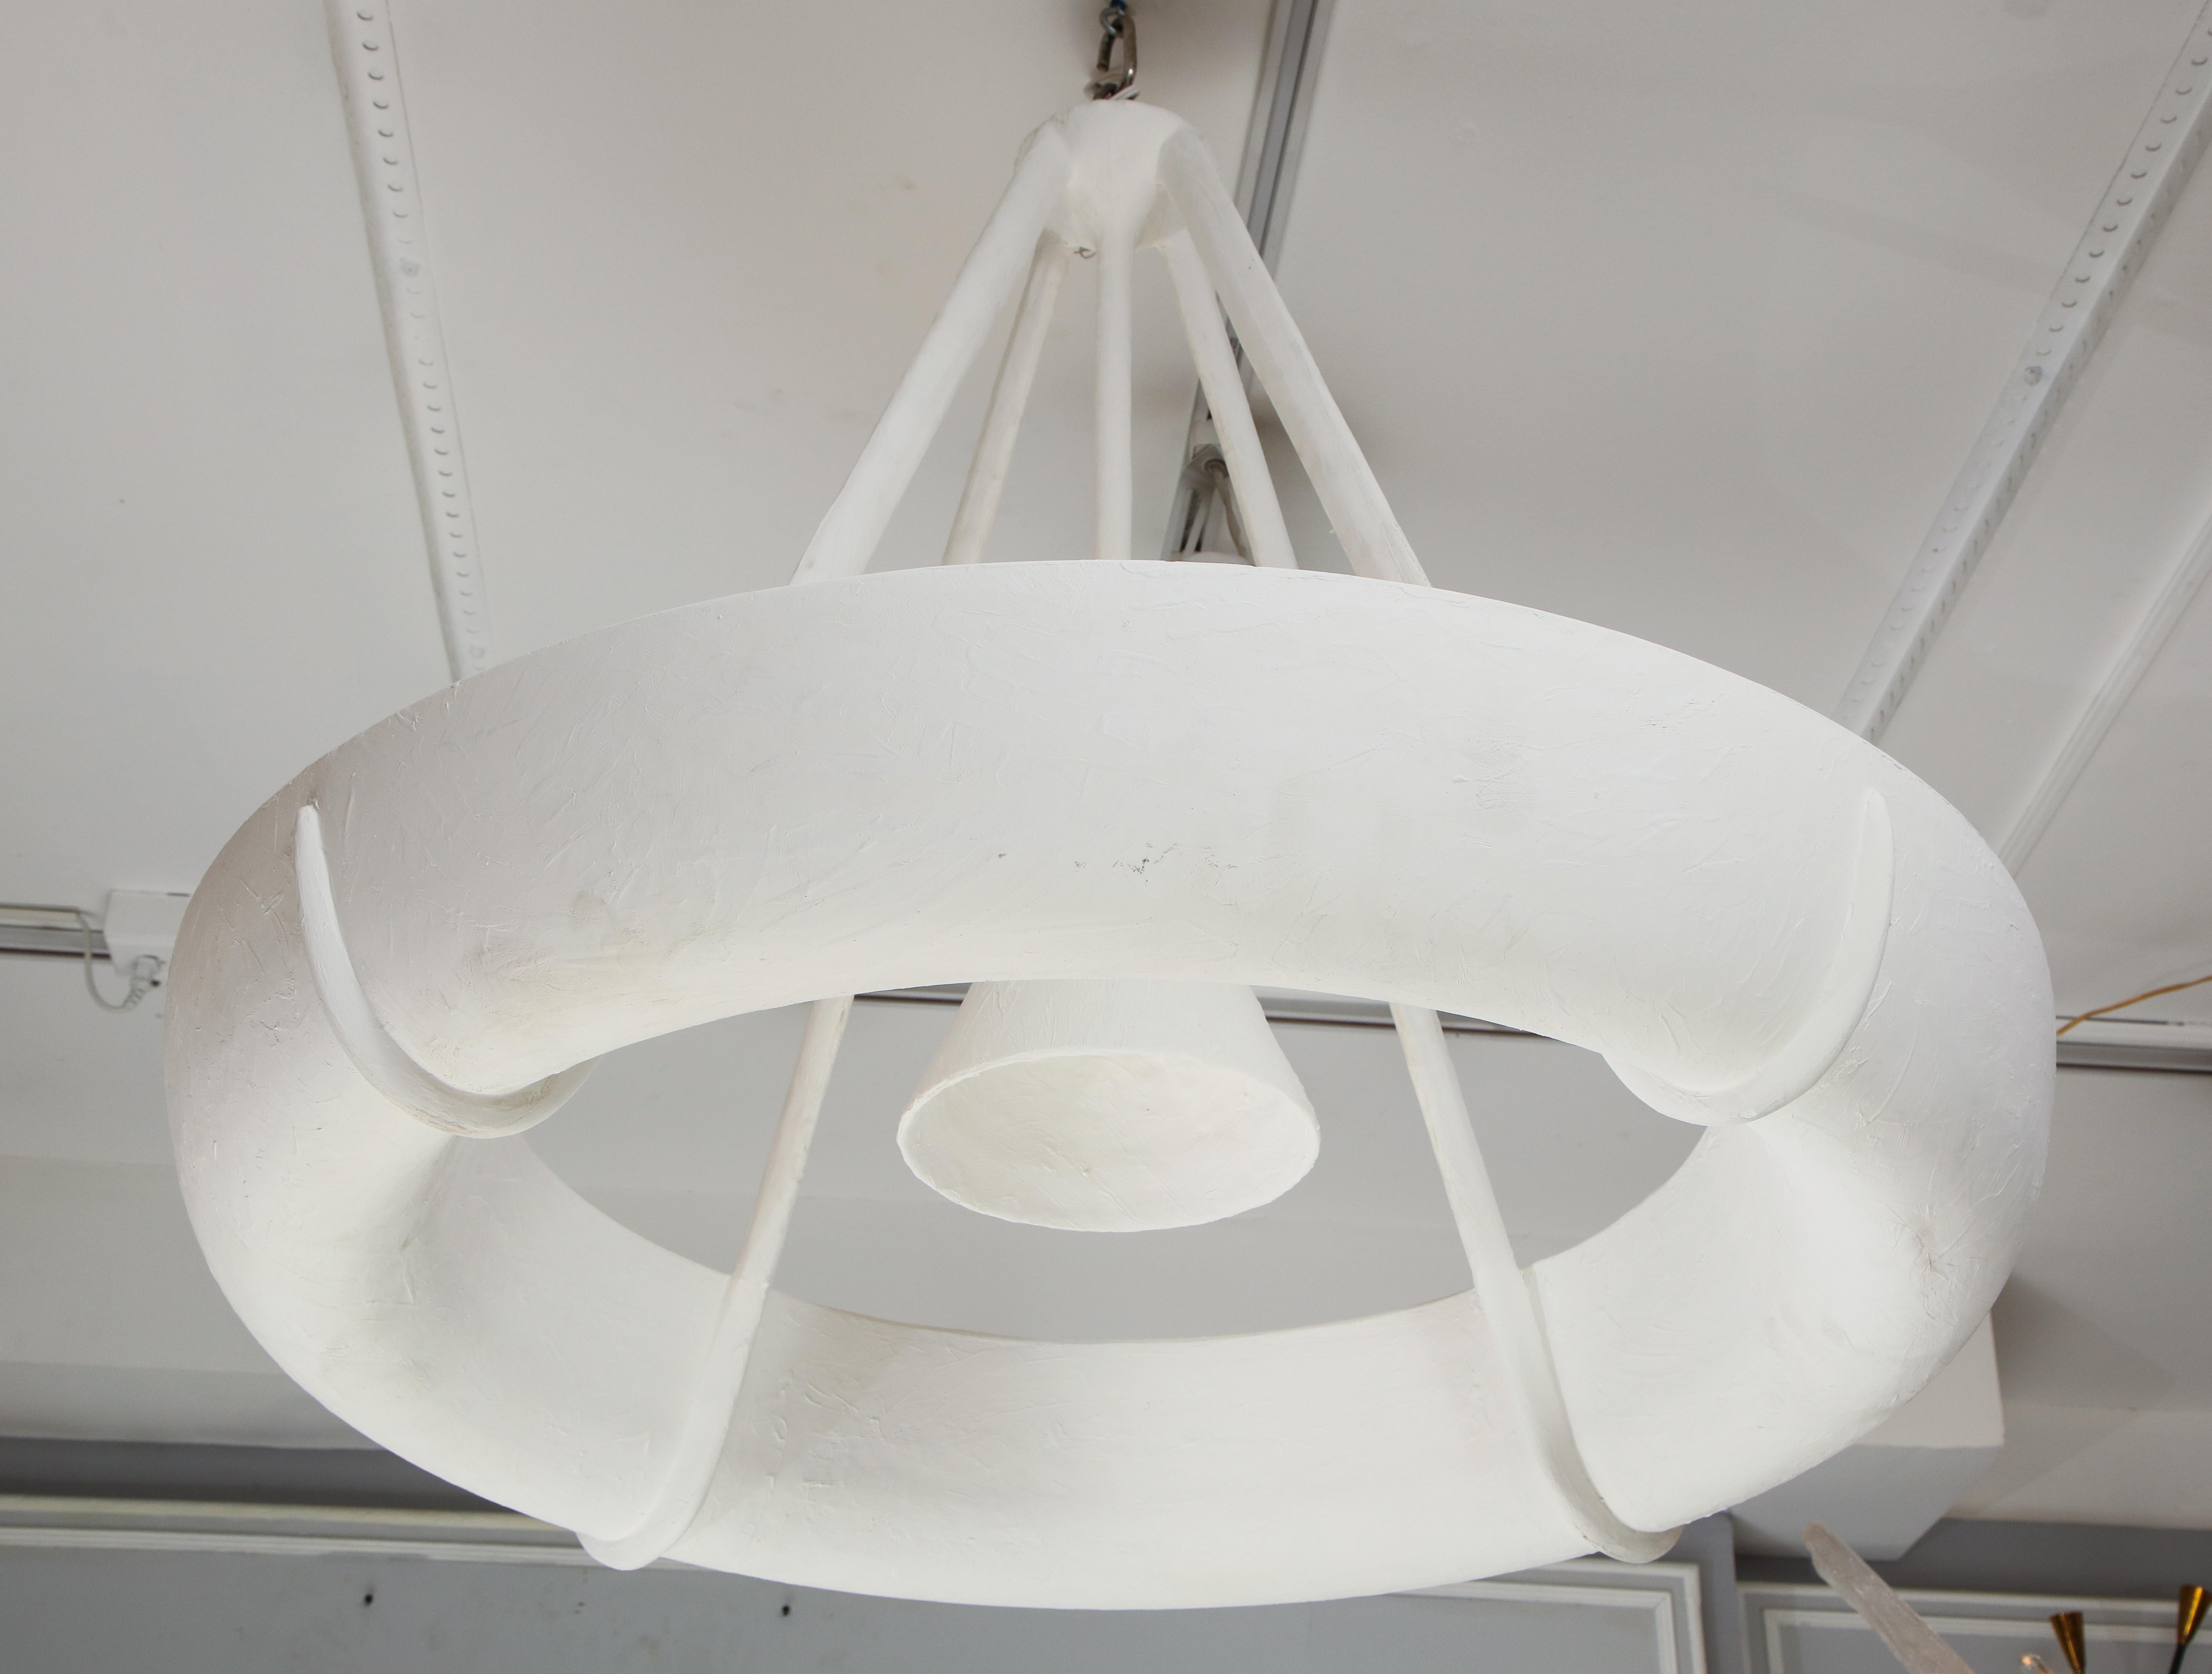 Sculptural bespoke Neve plaster fixture in the Jean Michel Frank manner.
Please note that this fixture takes (1) Edison bulb at 40 or 60 watts in the center and (8) e-12 candelabra bulbs at 40 watts each in the interior. = 320 watts inside ring. 